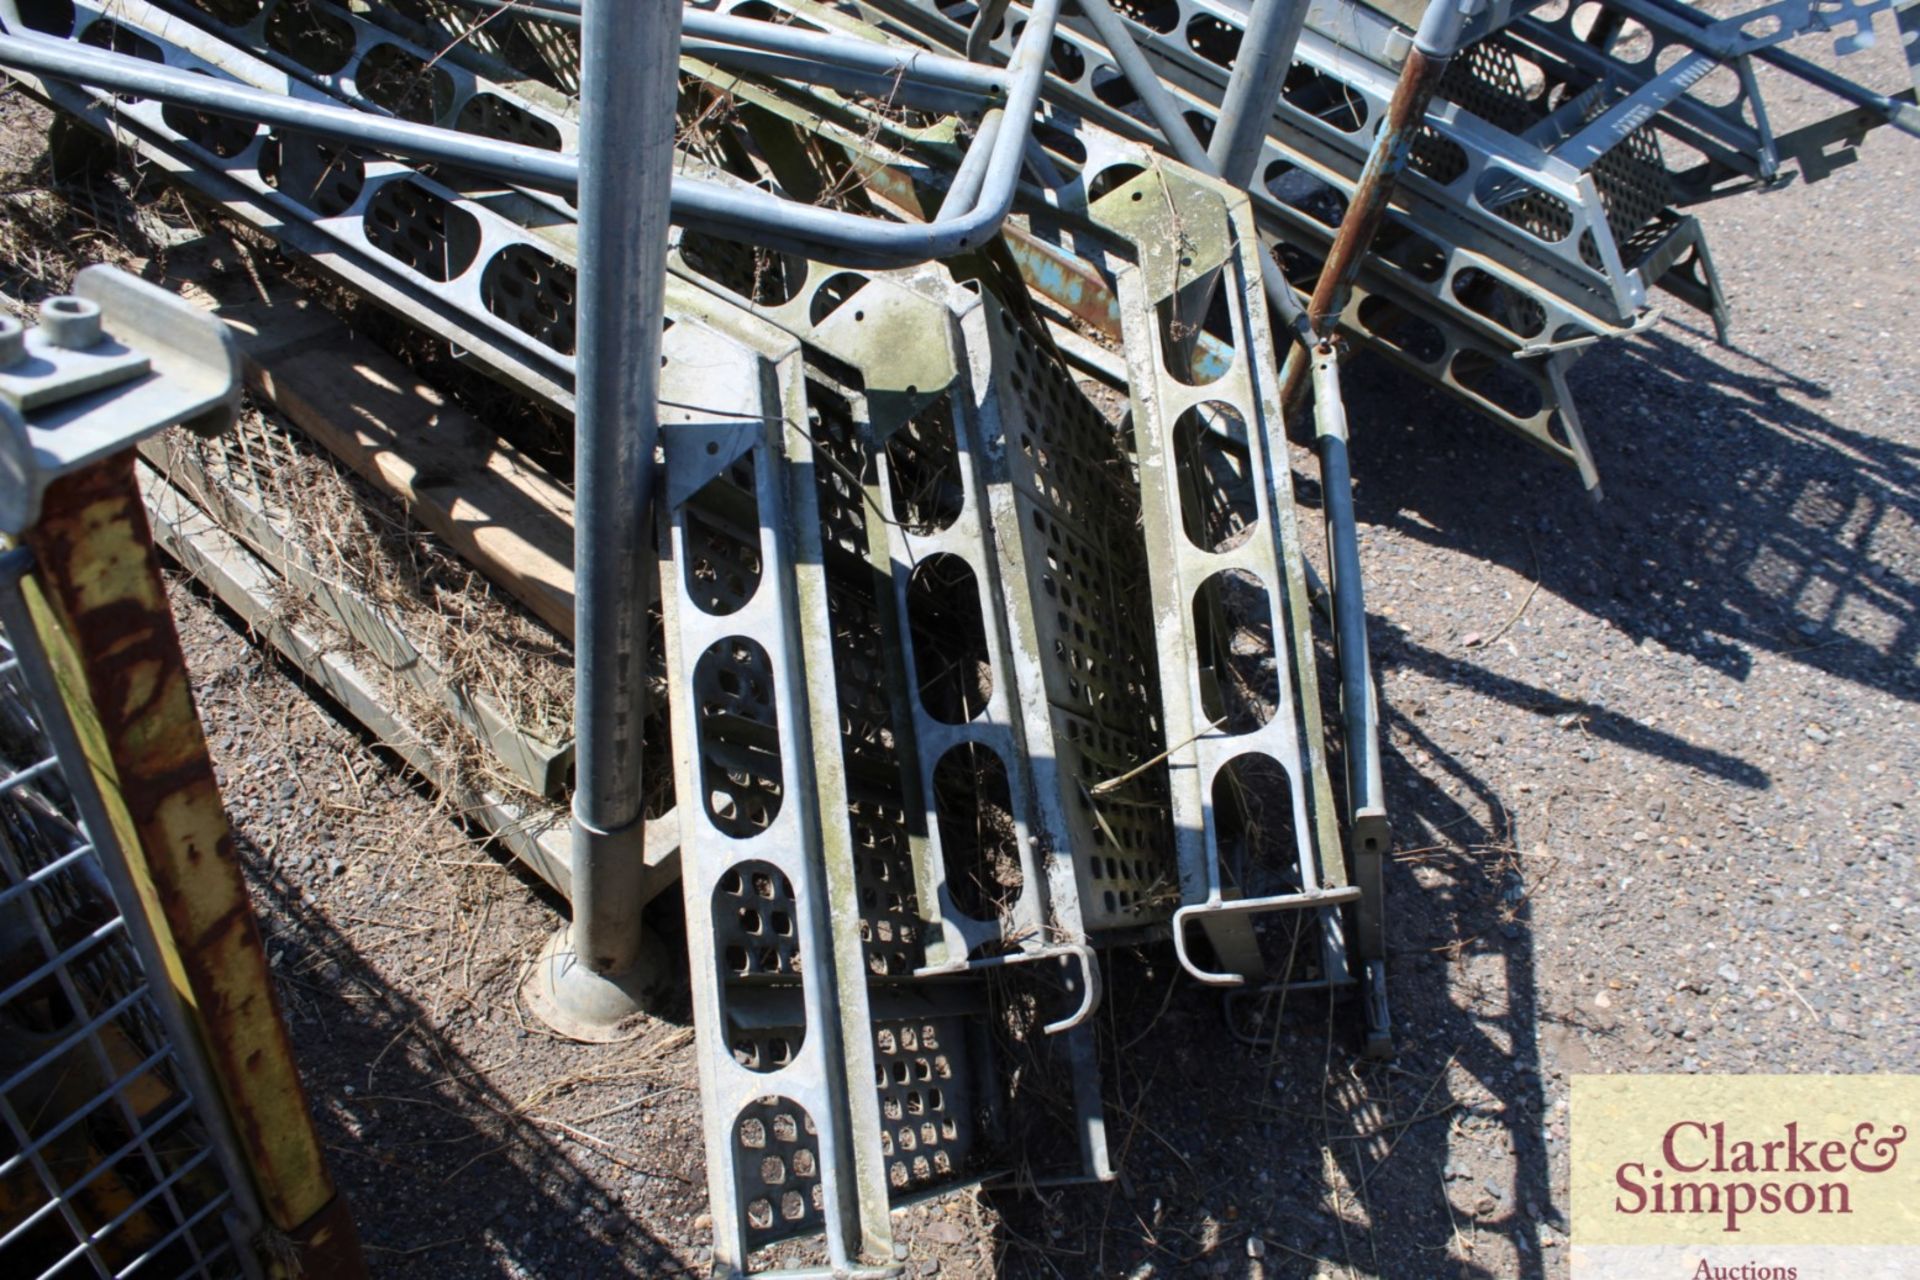 Stillage of Haki Scaffolding Staircase components. - Image 6 of 6